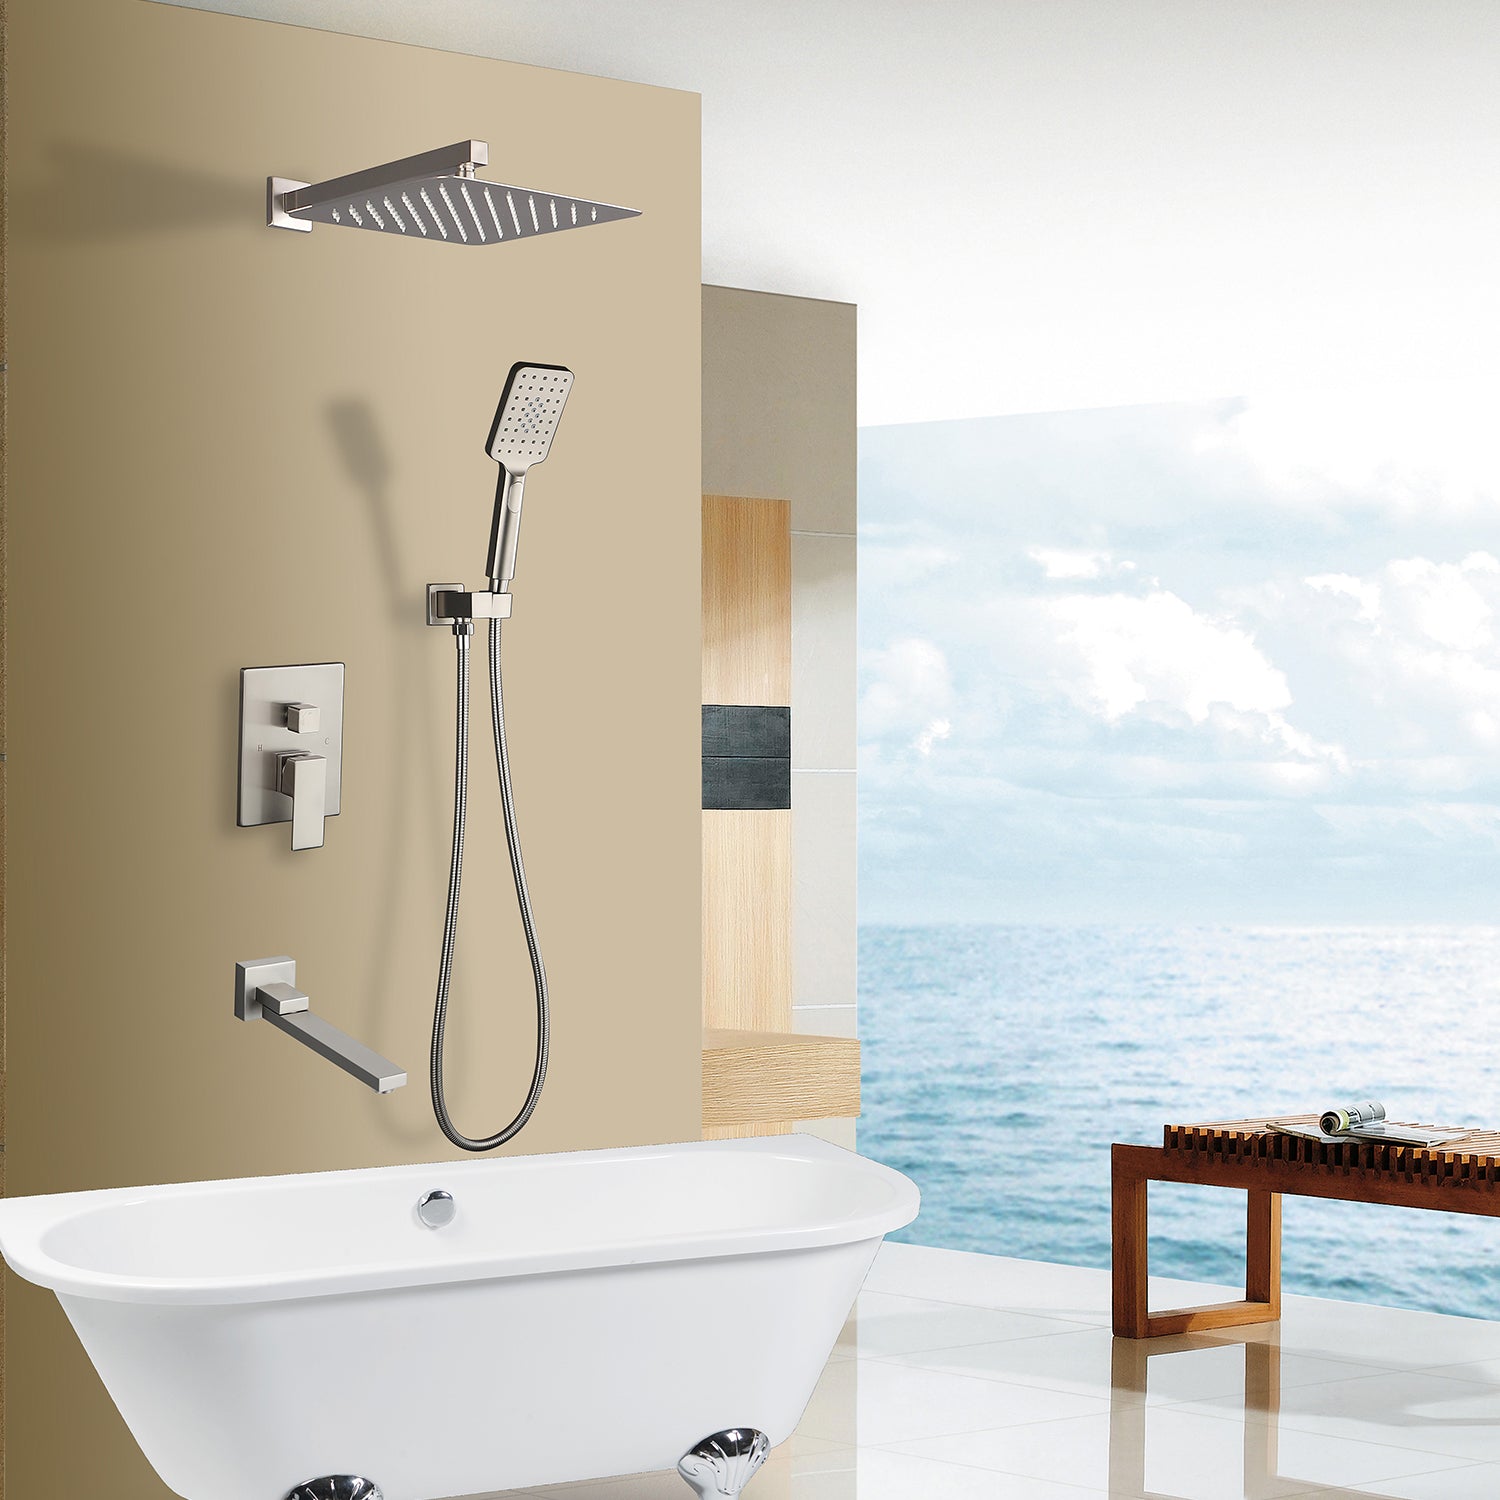 【Rainlex RX98103-10】10" Shower Head Three Functions Wall-Mount Balance Square Square Shower Faucet(Rough-in Valve Included)